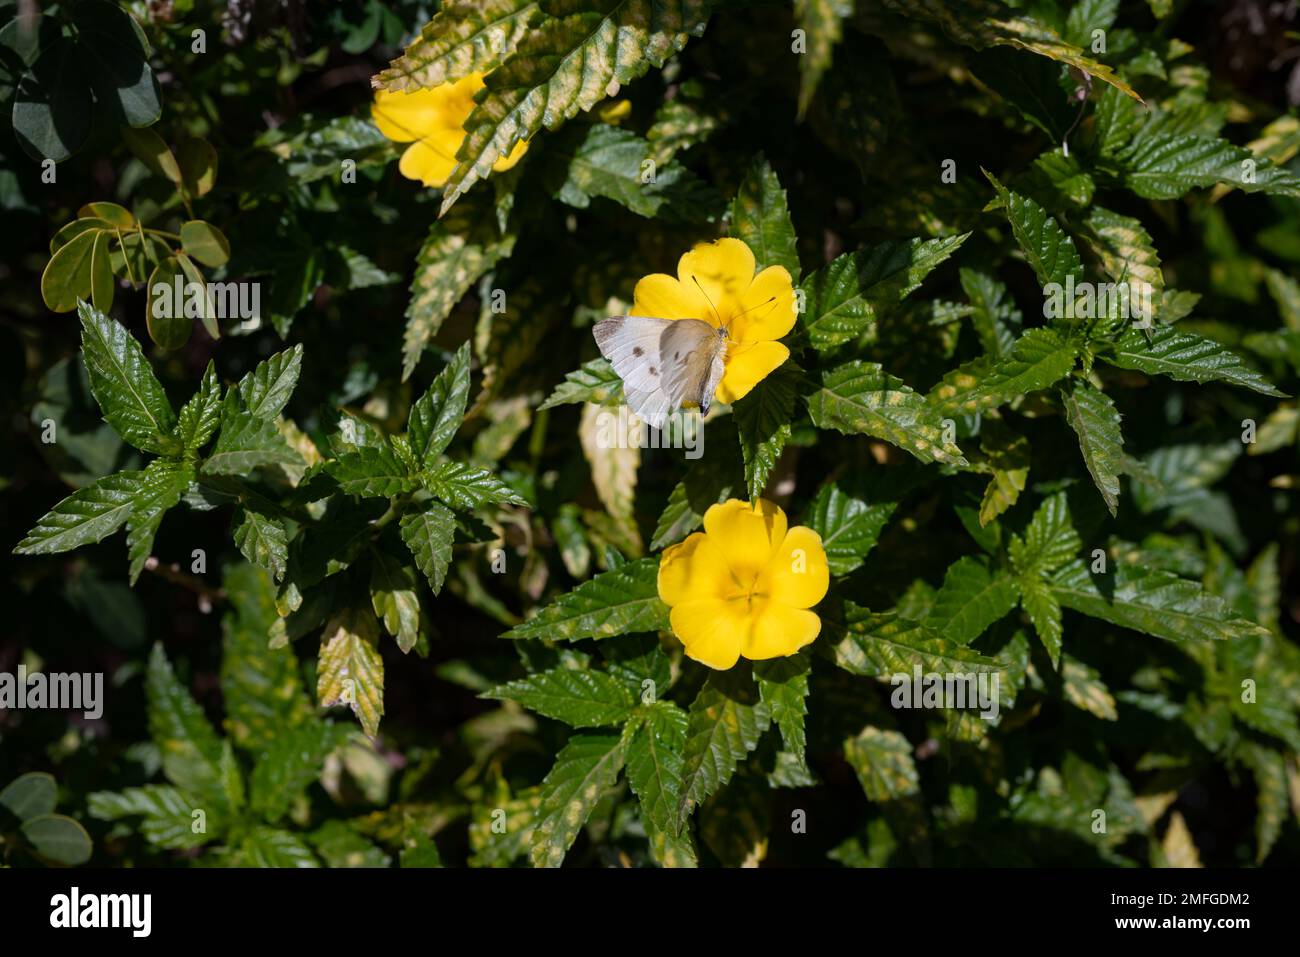 Yellow flowers of buttercup plant pollinated by large white butterfly Stock Photo